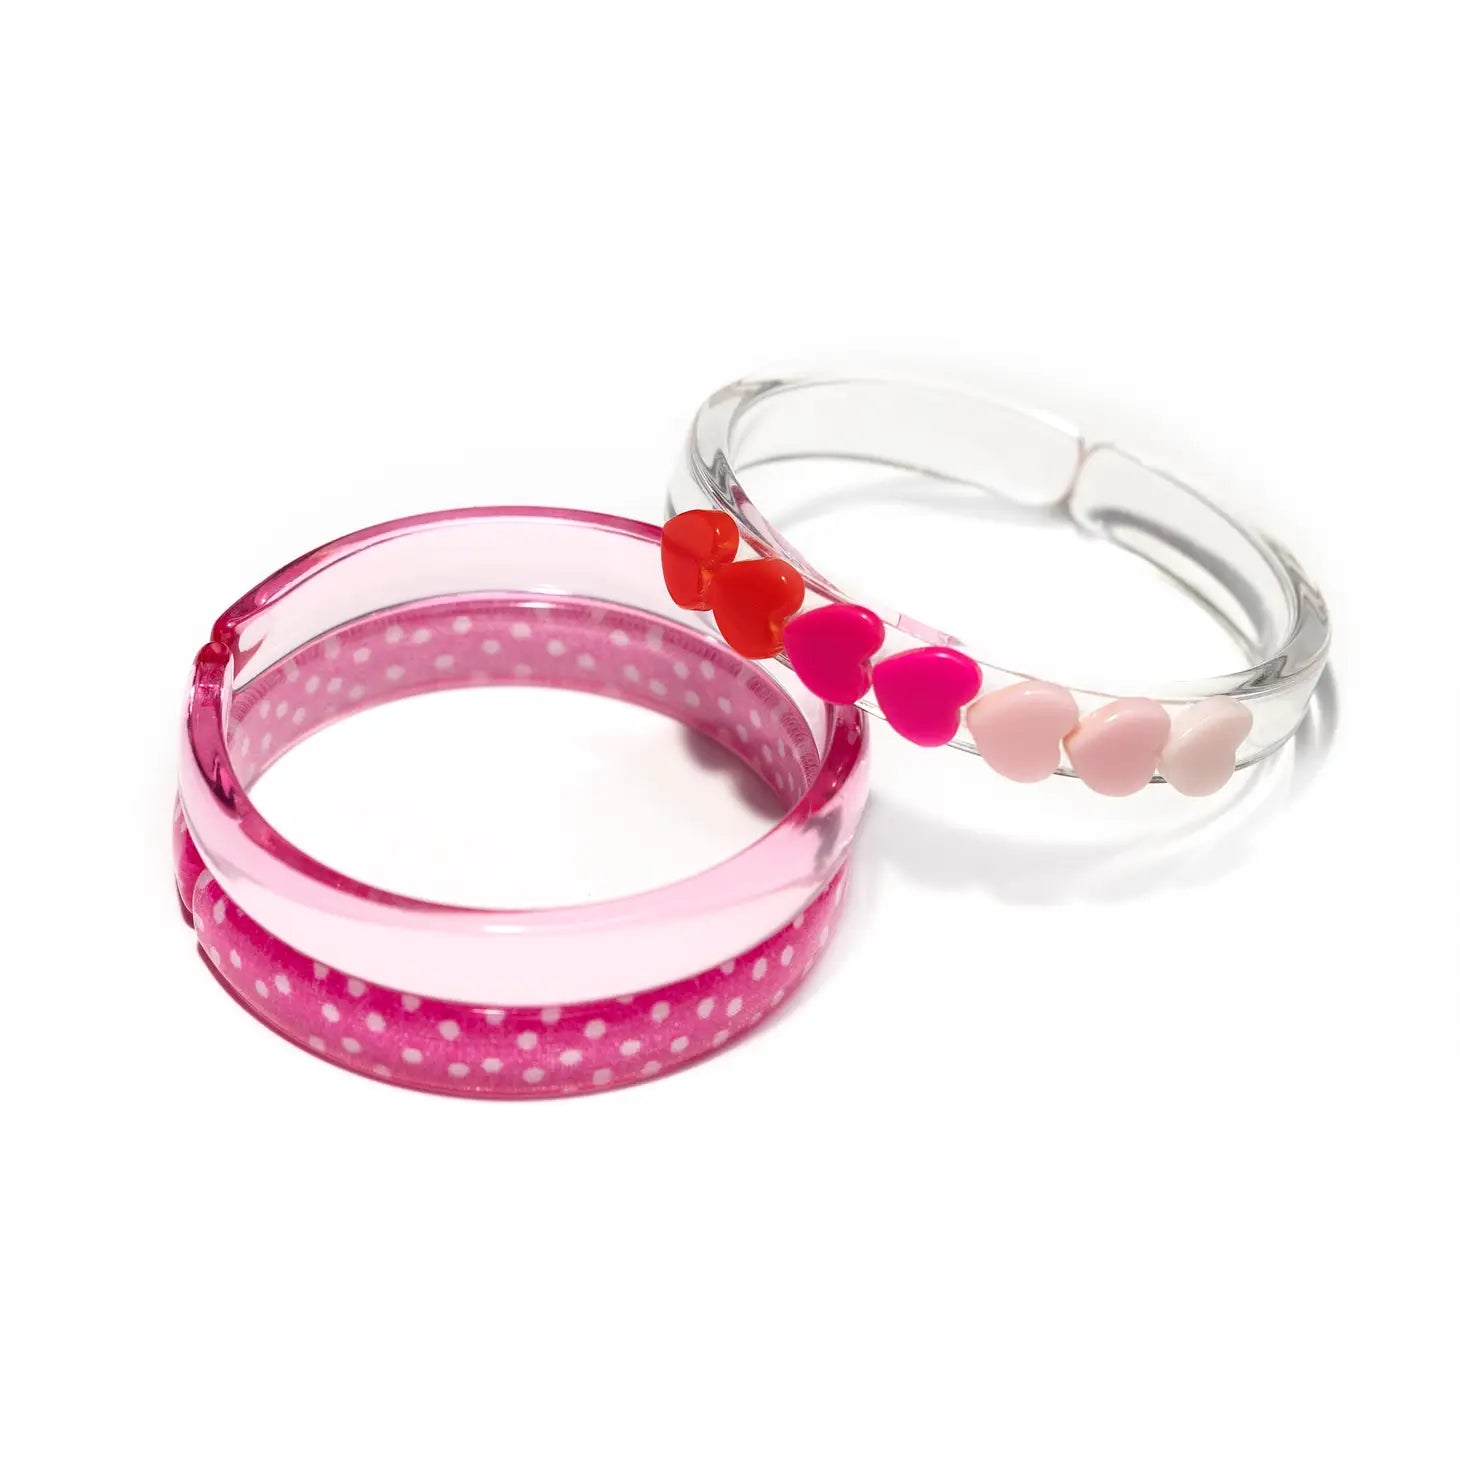 Lilies & Roses Centipede Heart Pink Shades Bangle Set of 3